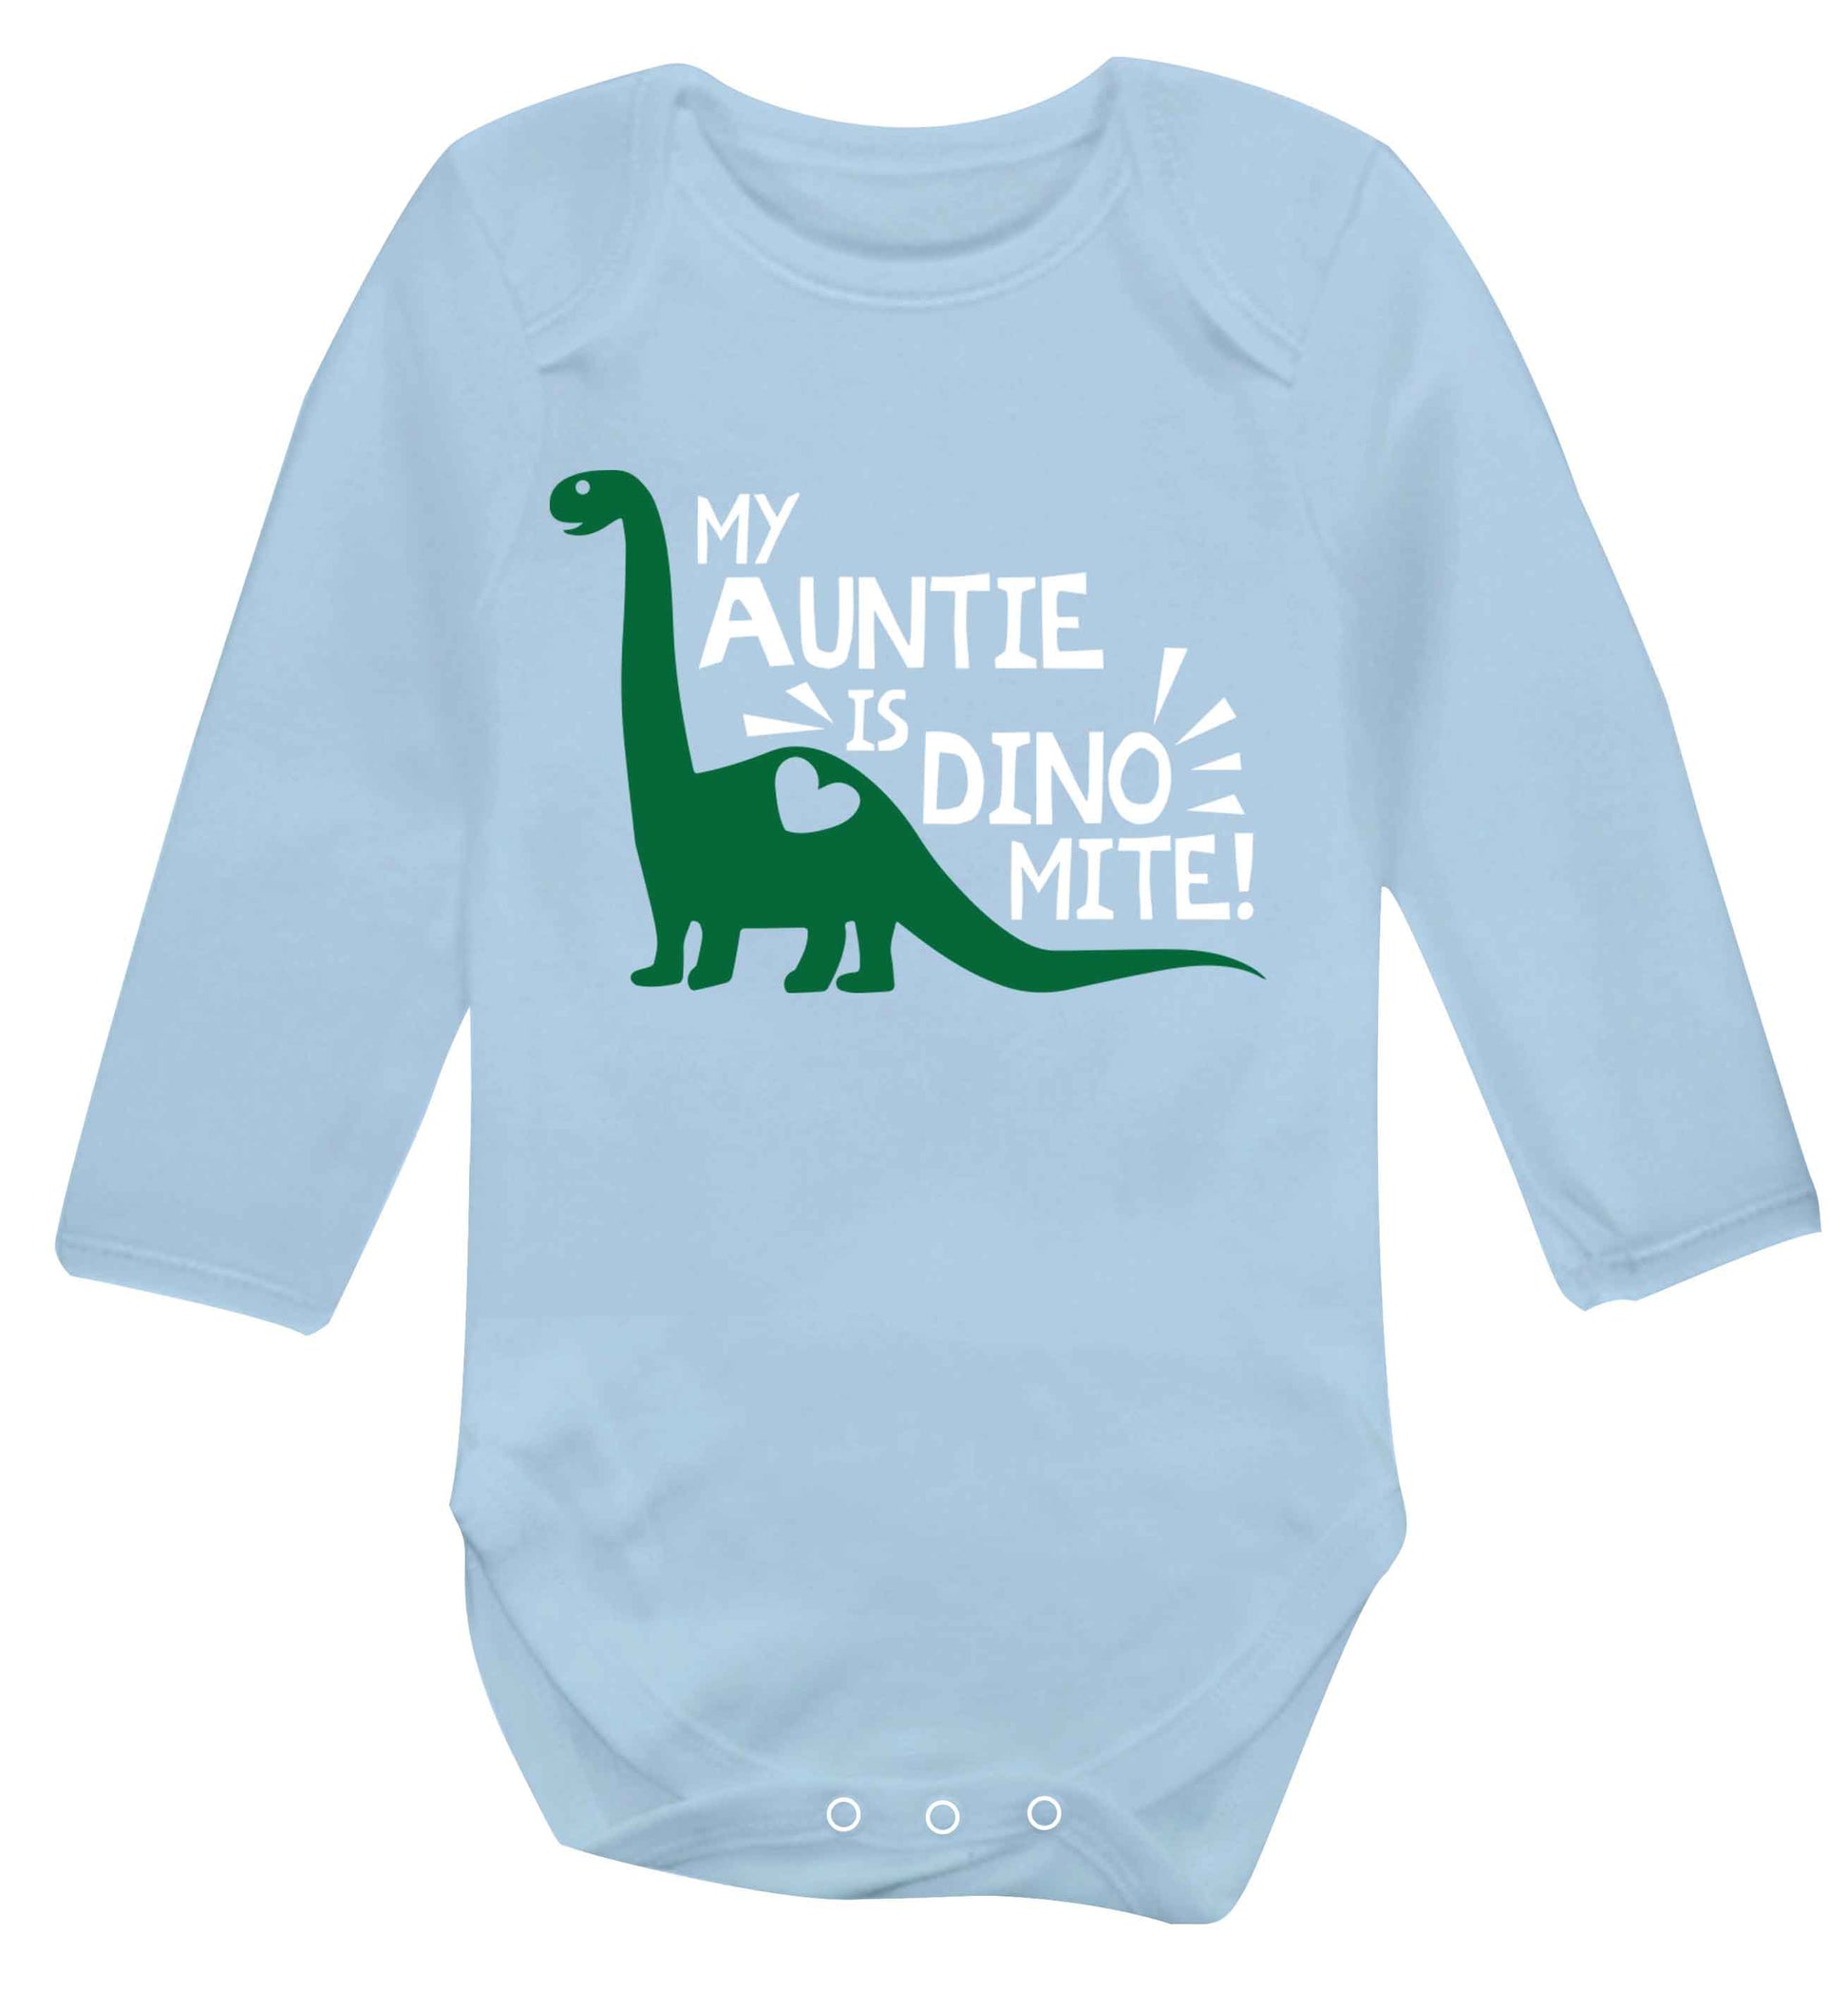 My auntie is dinomite! Baby Vest long sleeved pale blue 6-12 months